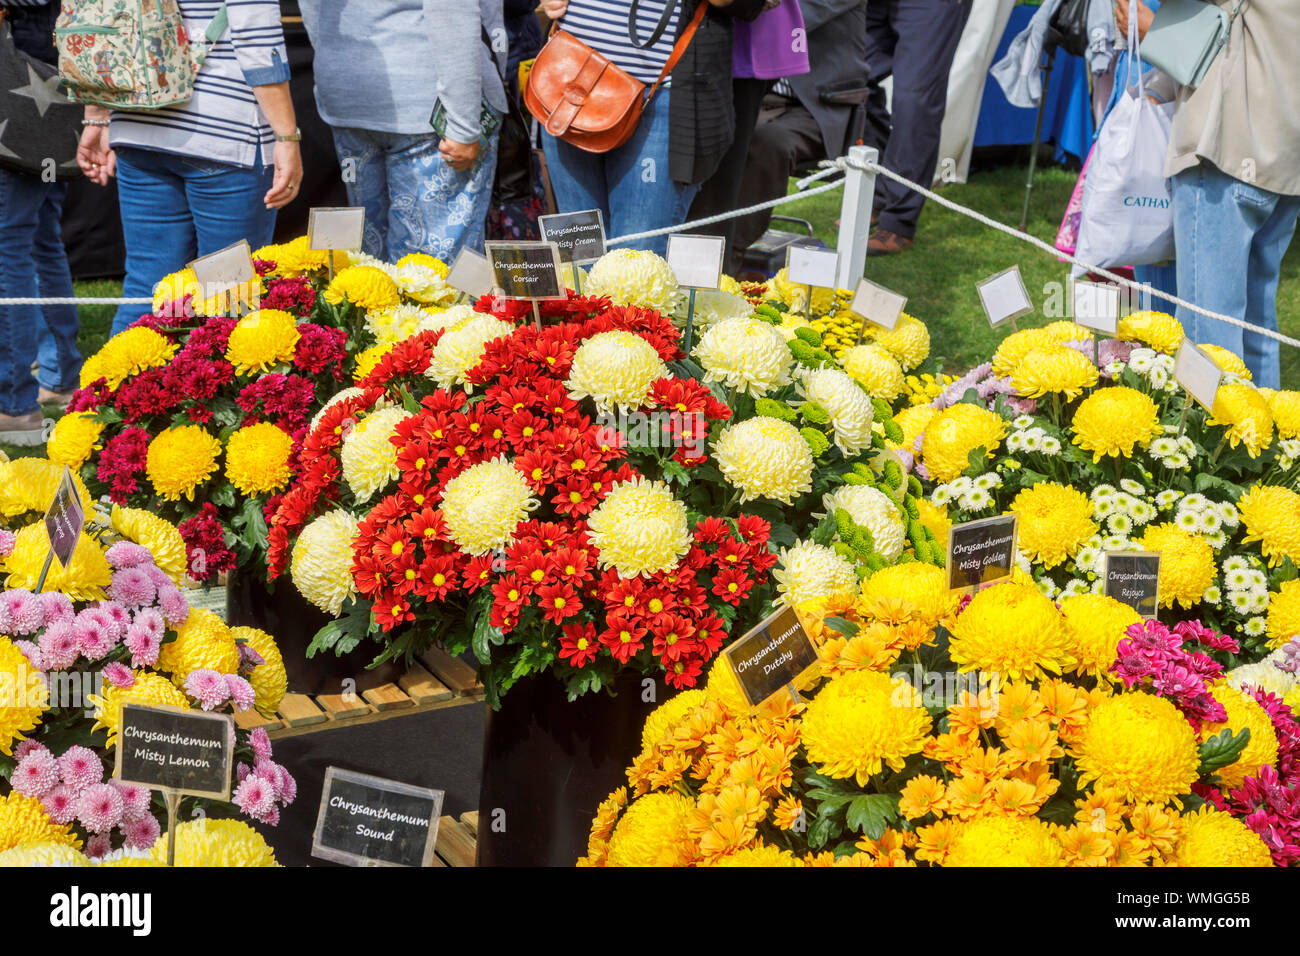 Display of chrysanthemum flowers at a stall at the September 2019 Wisley Garden Flower Show at RHS Garden Wisley, Surrey, south-east England Stock Photo